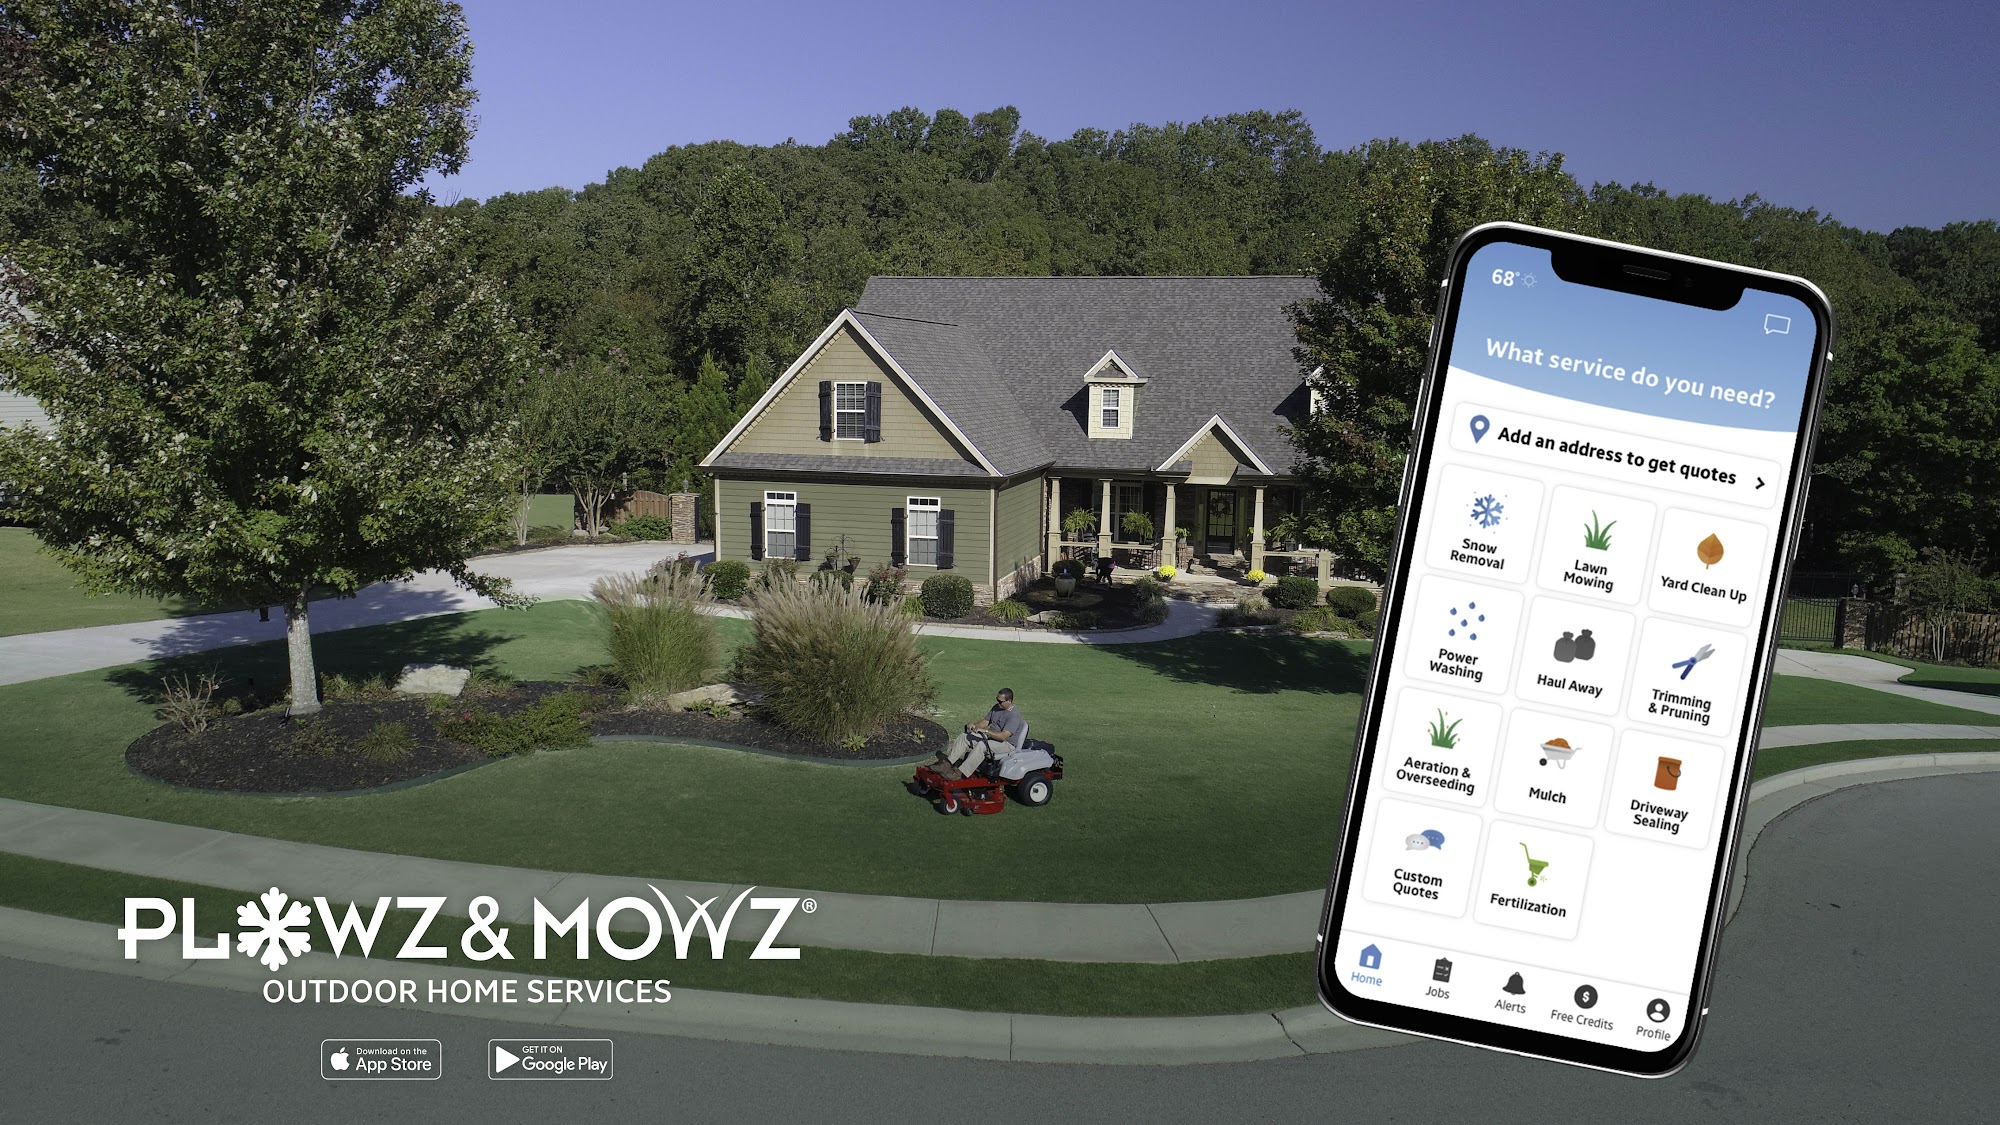 Plowz & Mowz of Houston - Lawn Care & Landscaping Service